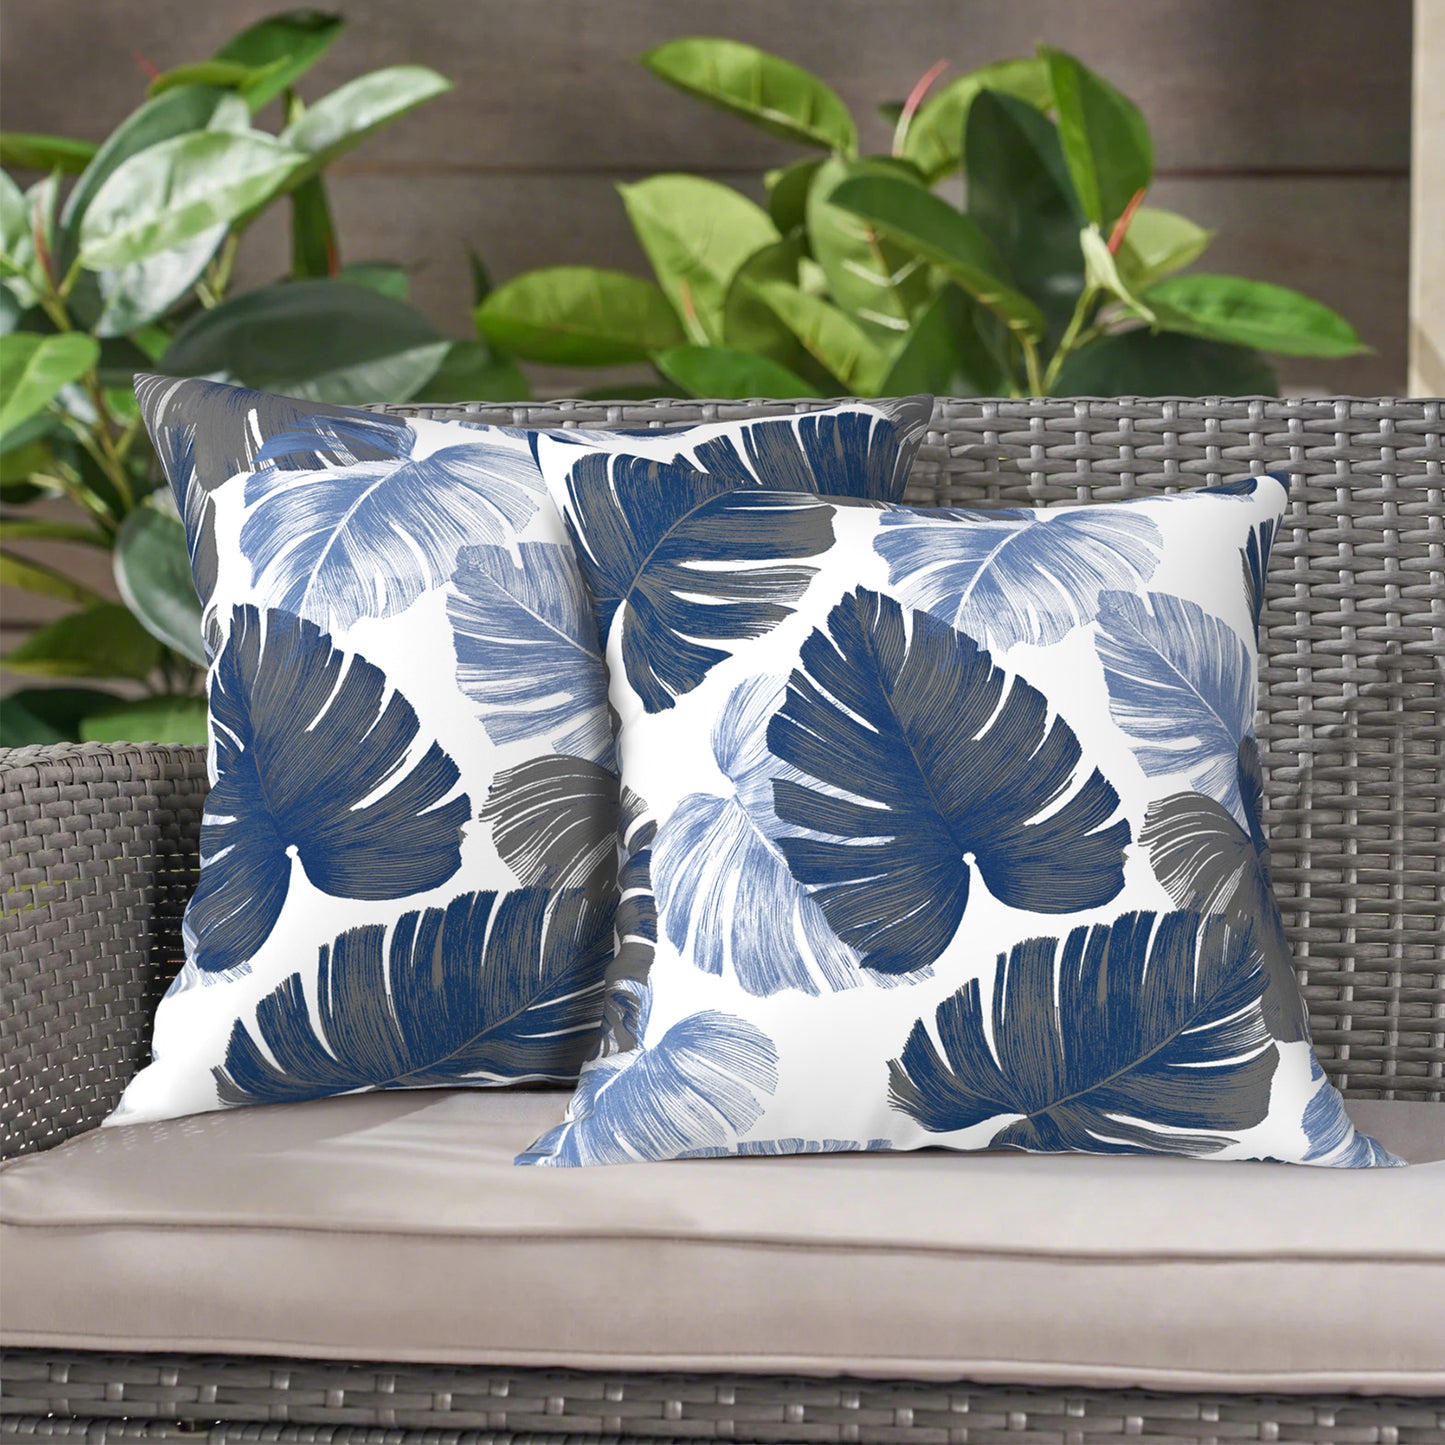 Melody Elephant Outdoor Throw Pillow Covers Pack of 2, Decorative Water Repellent Square Pillow Cases 18x18 Inch, Patio Pillowcases for Home Patio Furniture Use, Monstera Blue